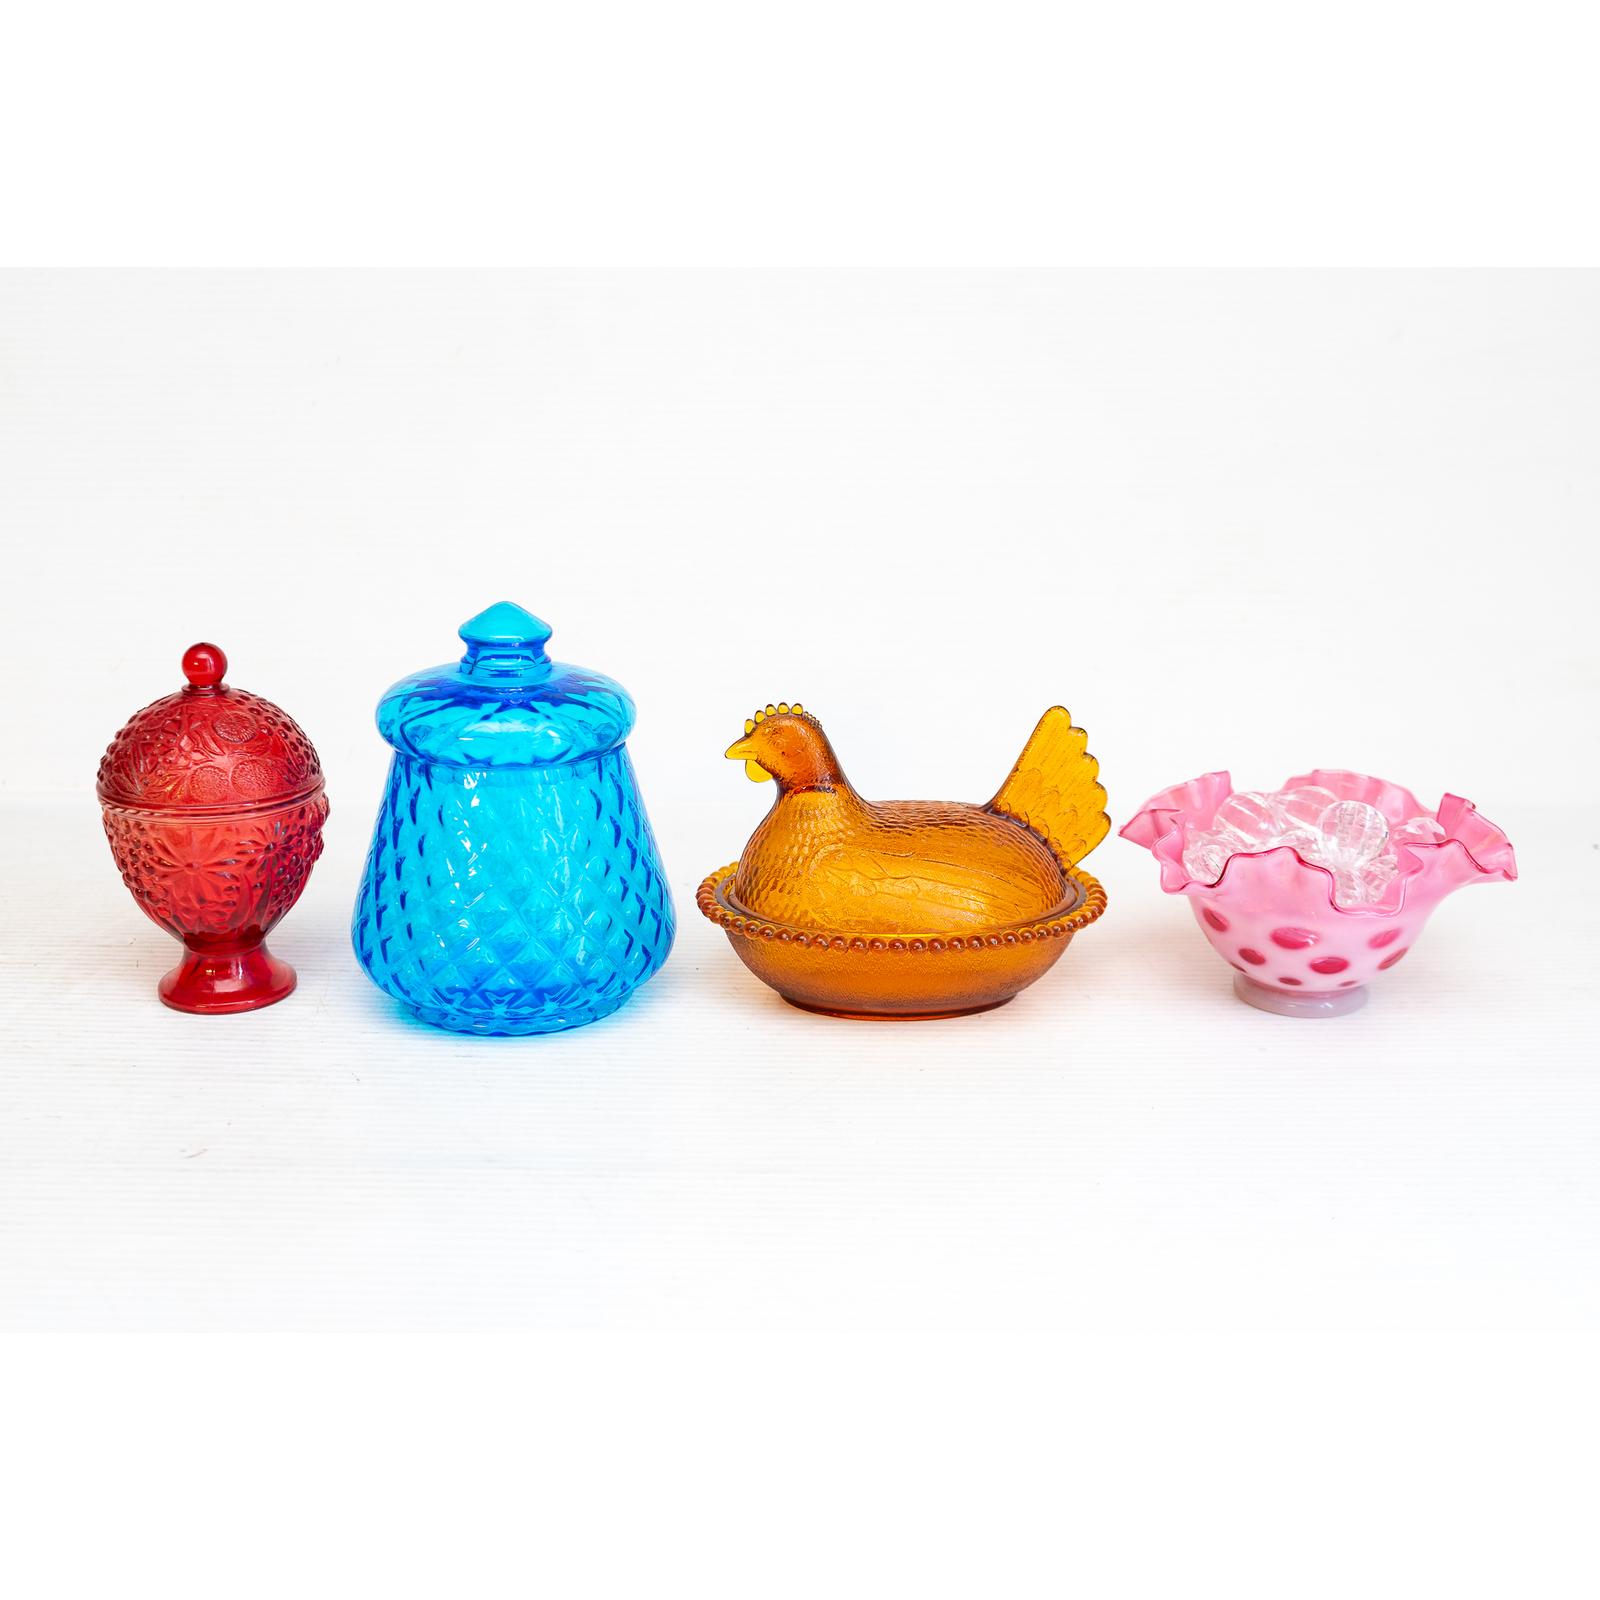 Colorful Candy Dishes | Harritt Group, Inc